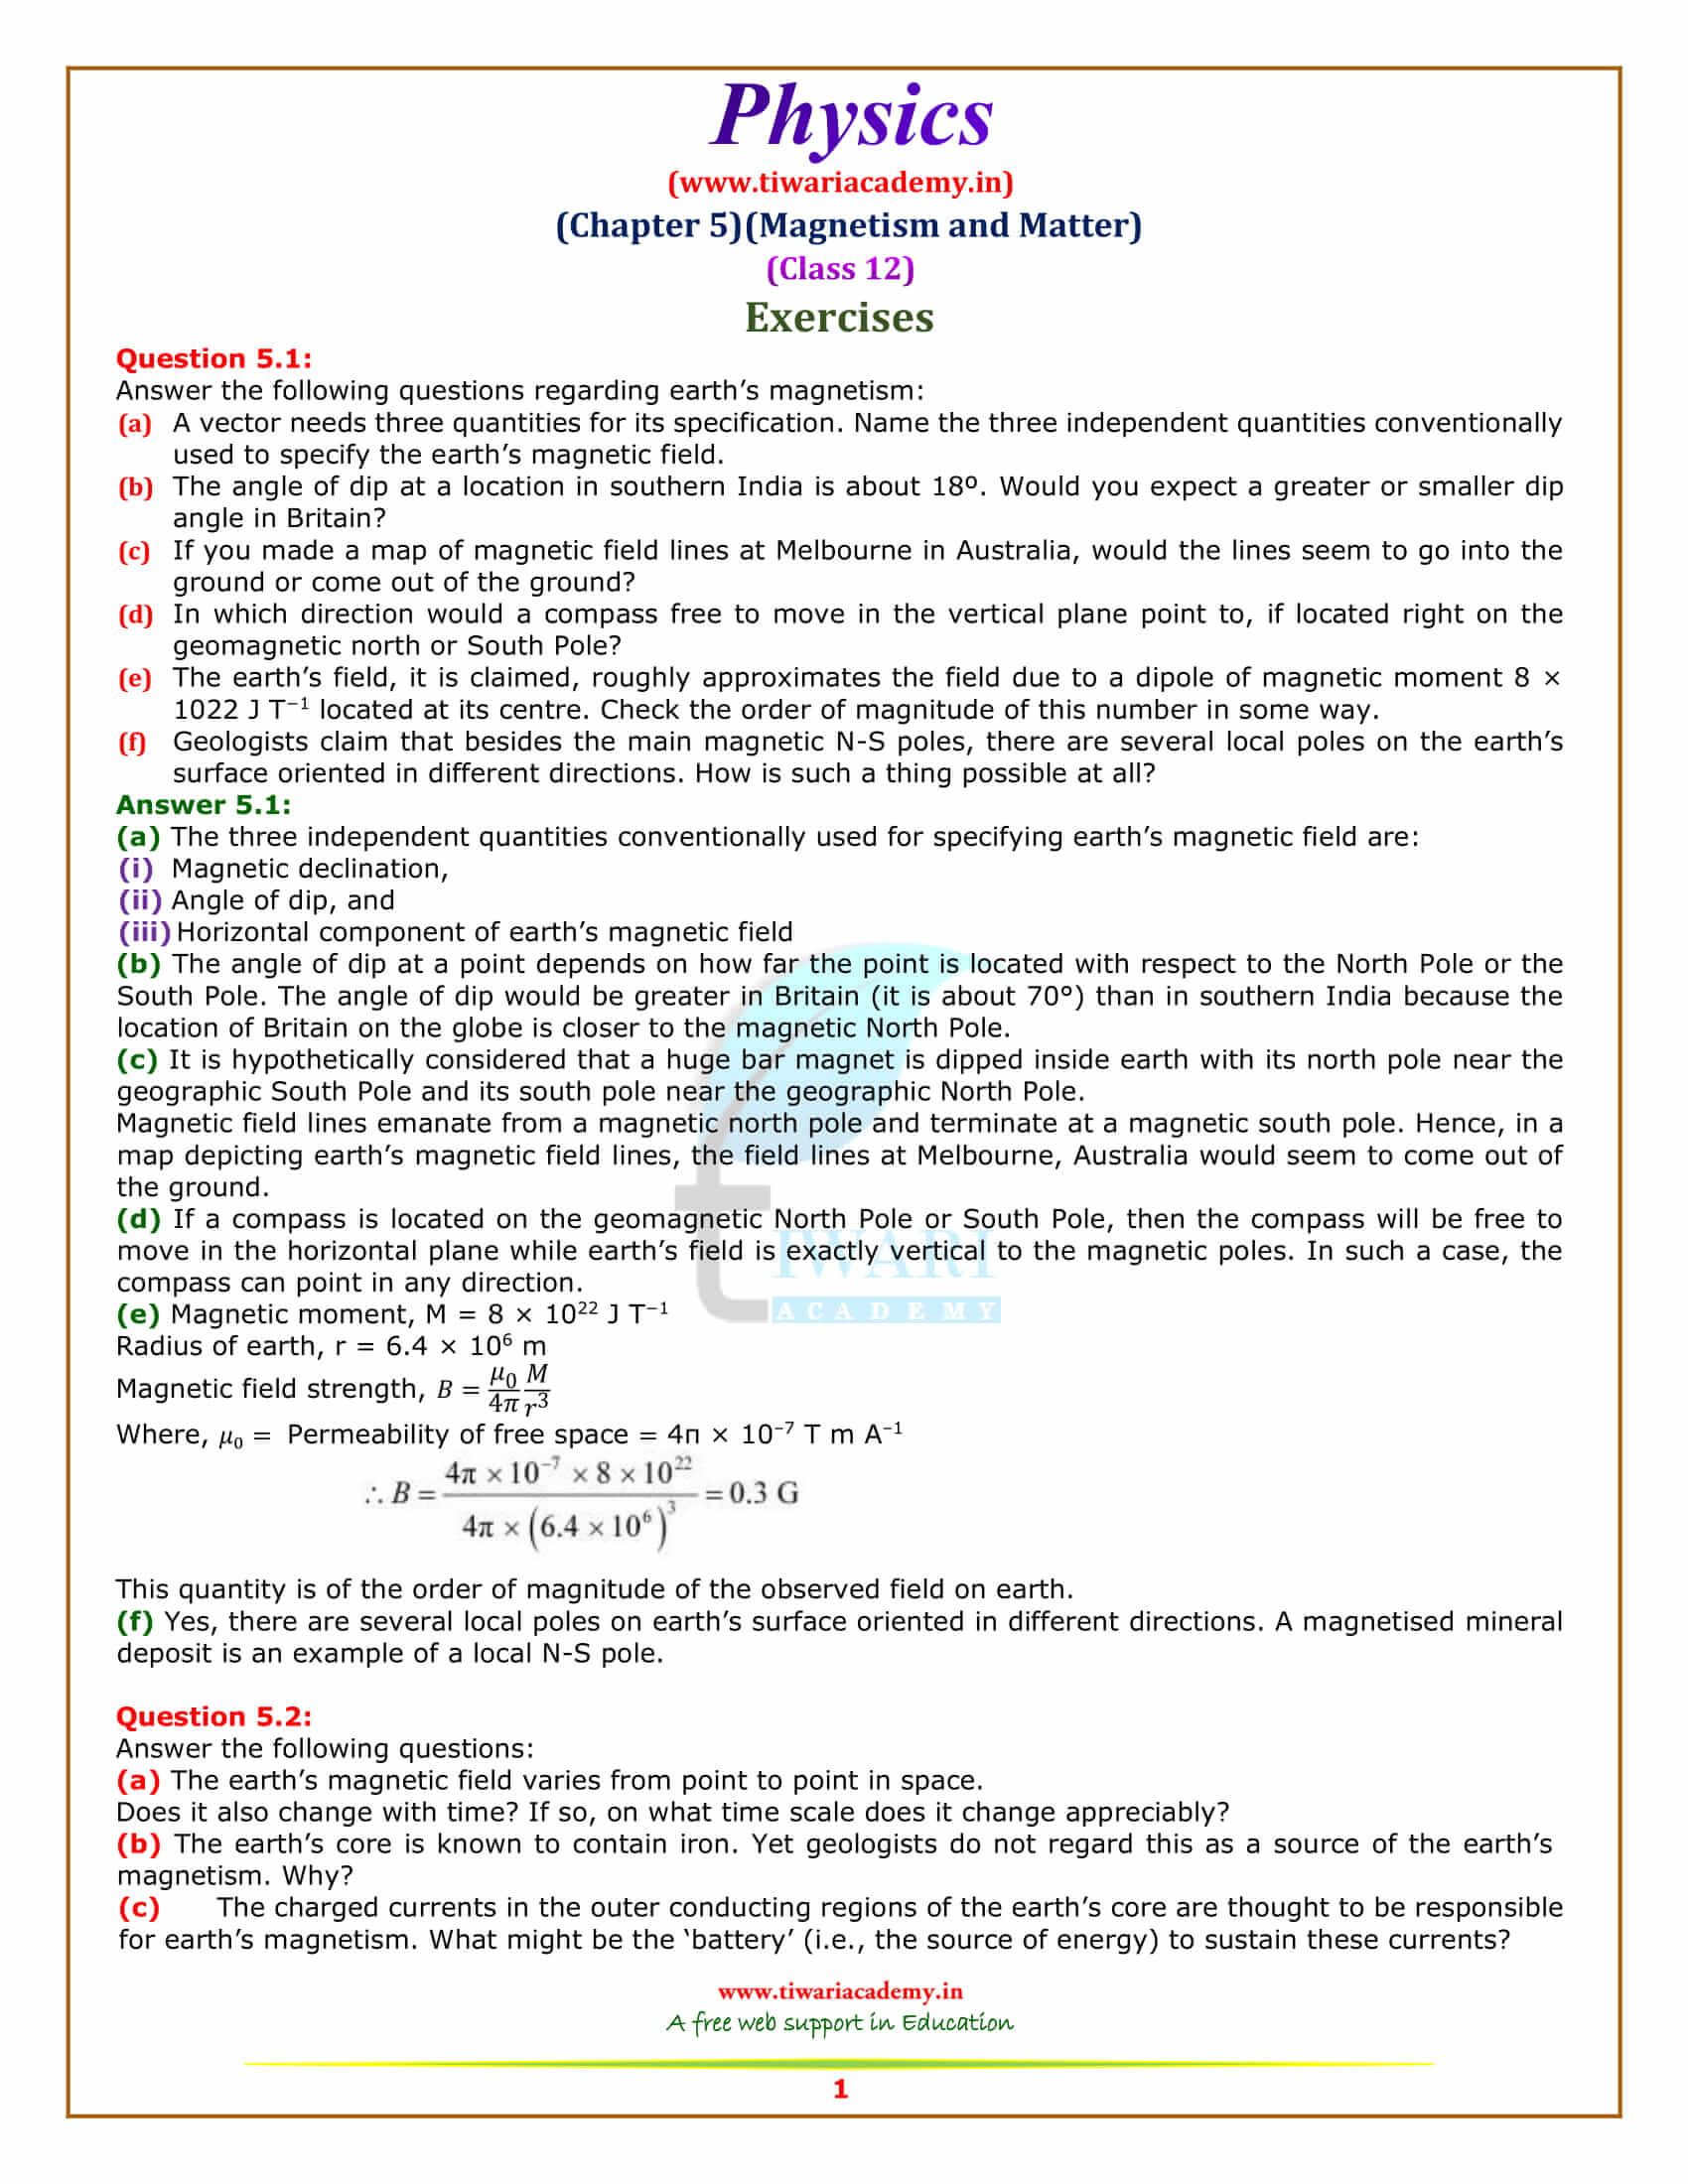 NCERT Solutions for Class 12 Physics Chapter 5 Magnetism and Matter